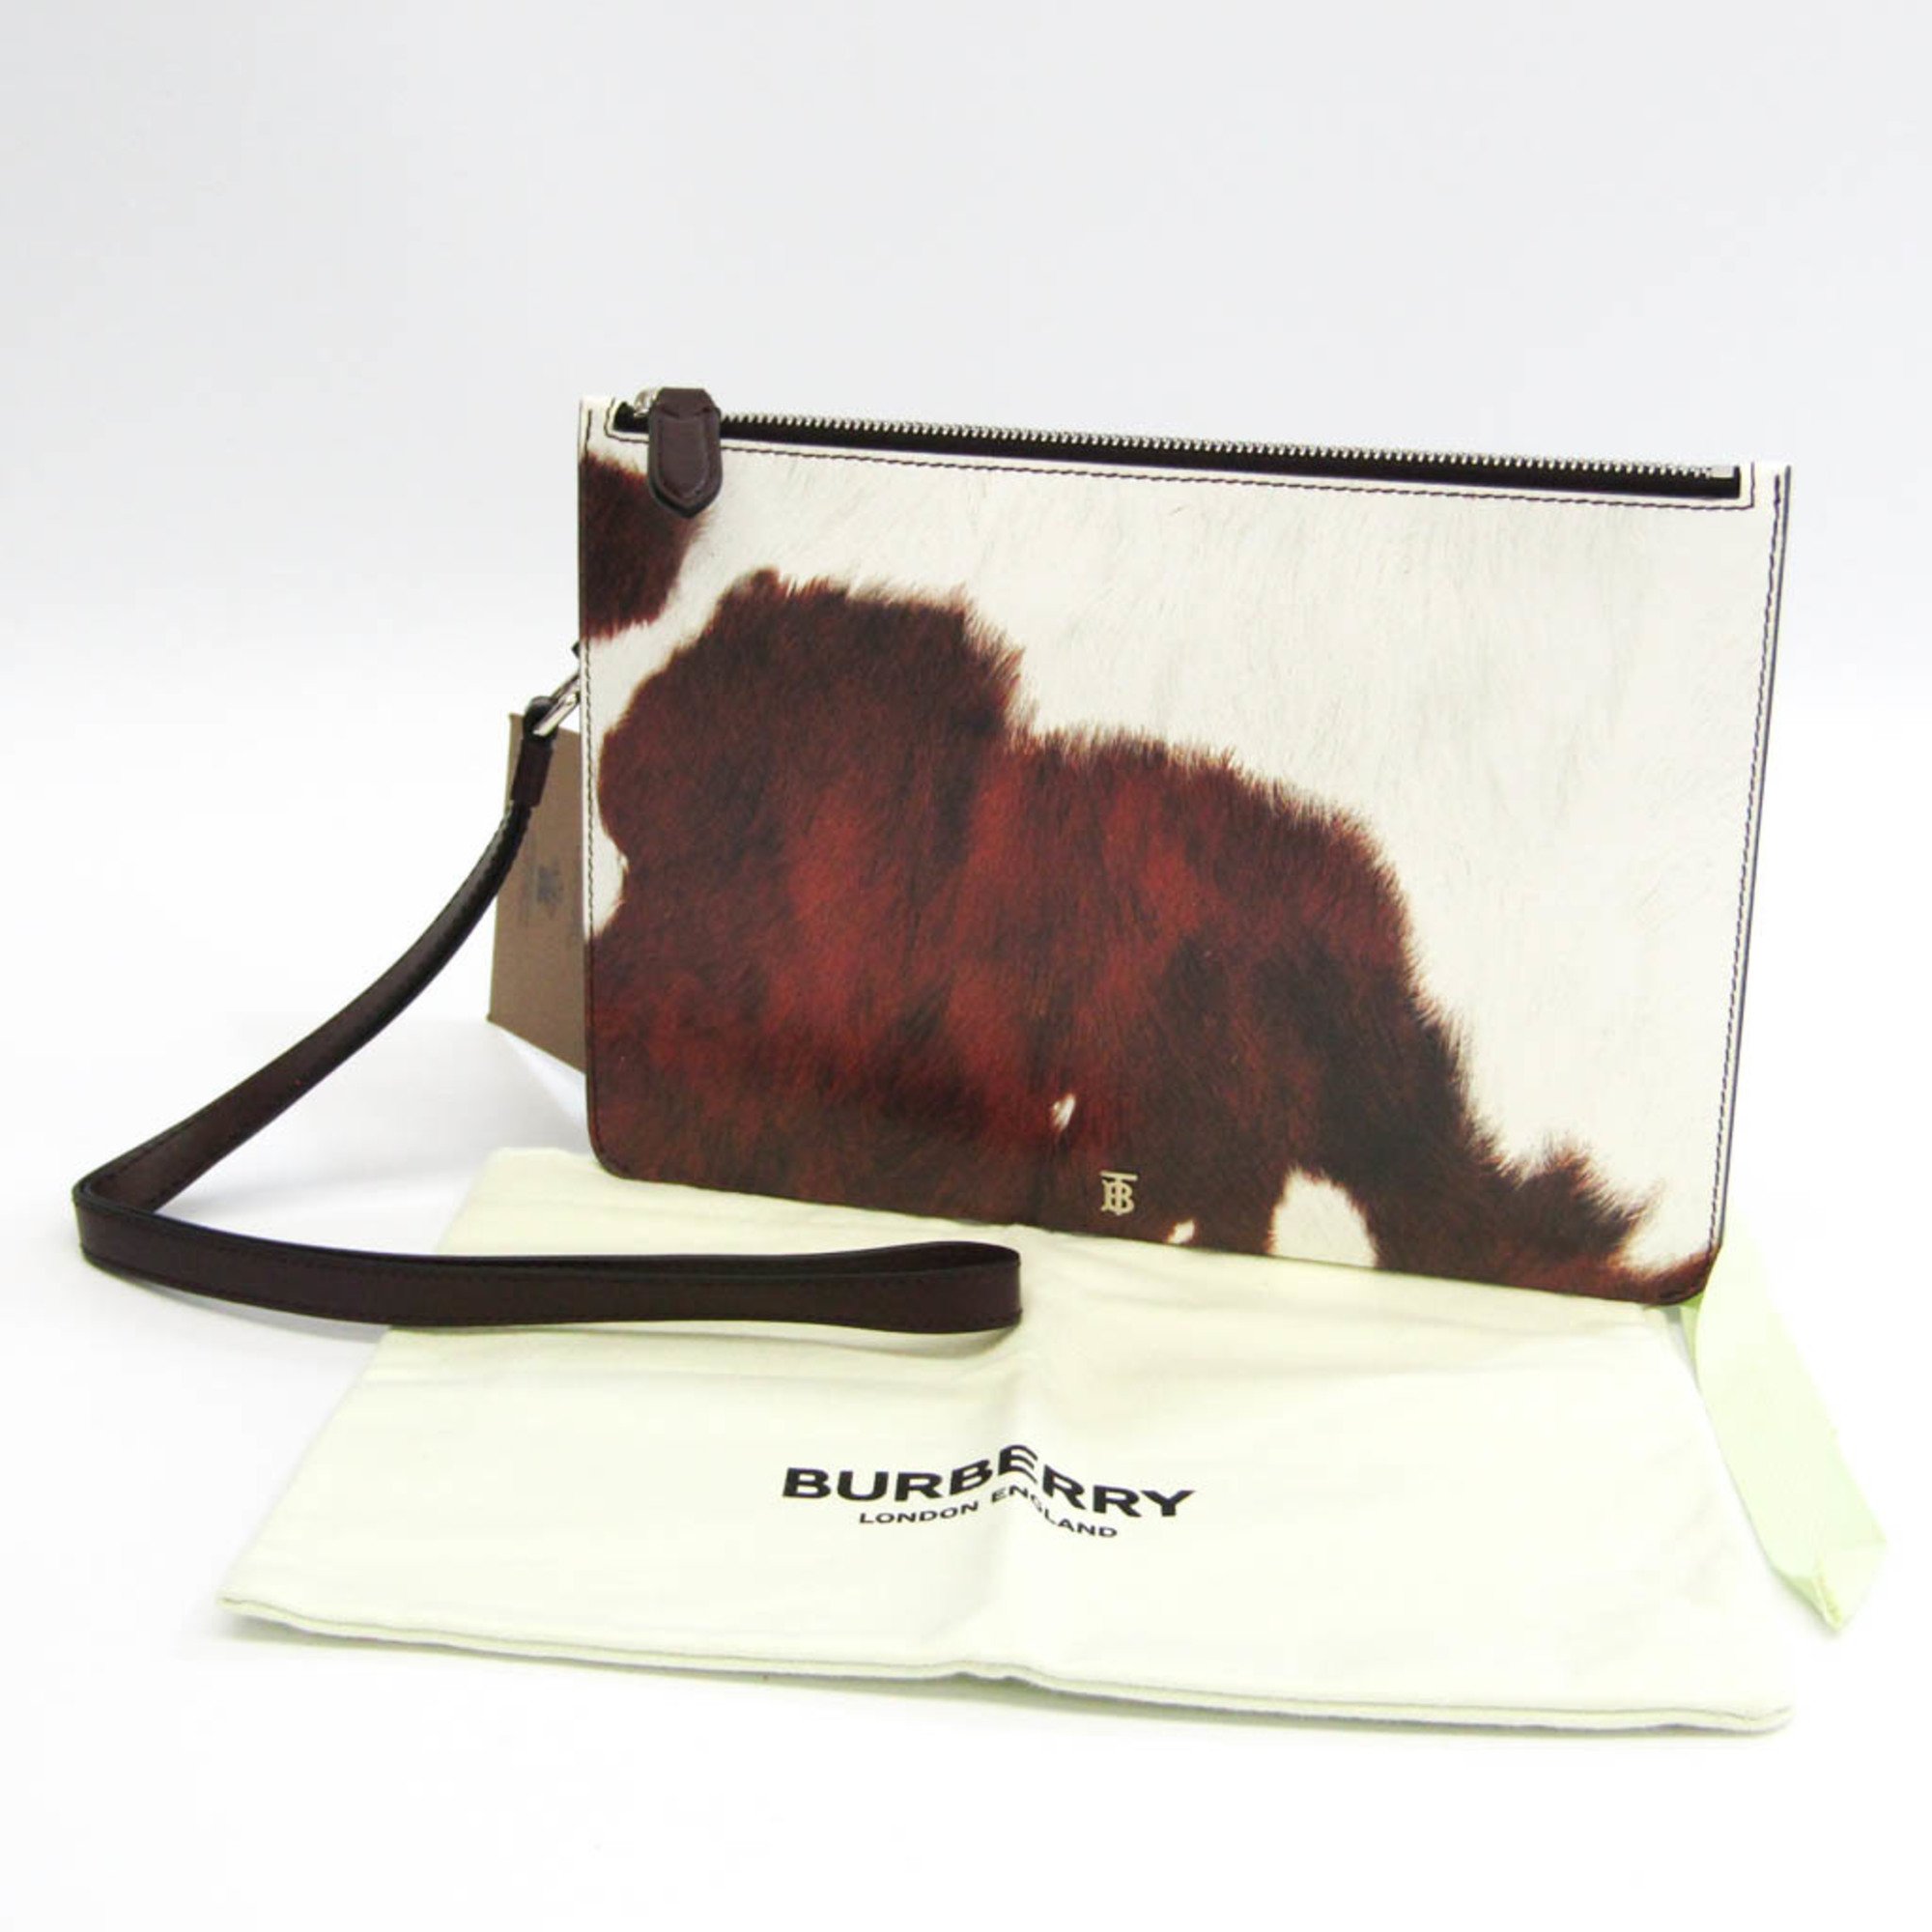 Burberry MD POUCH COW PRINT 8016991 Women,Men Leather,Patent Leather Clutch Bag Dark Brown,White